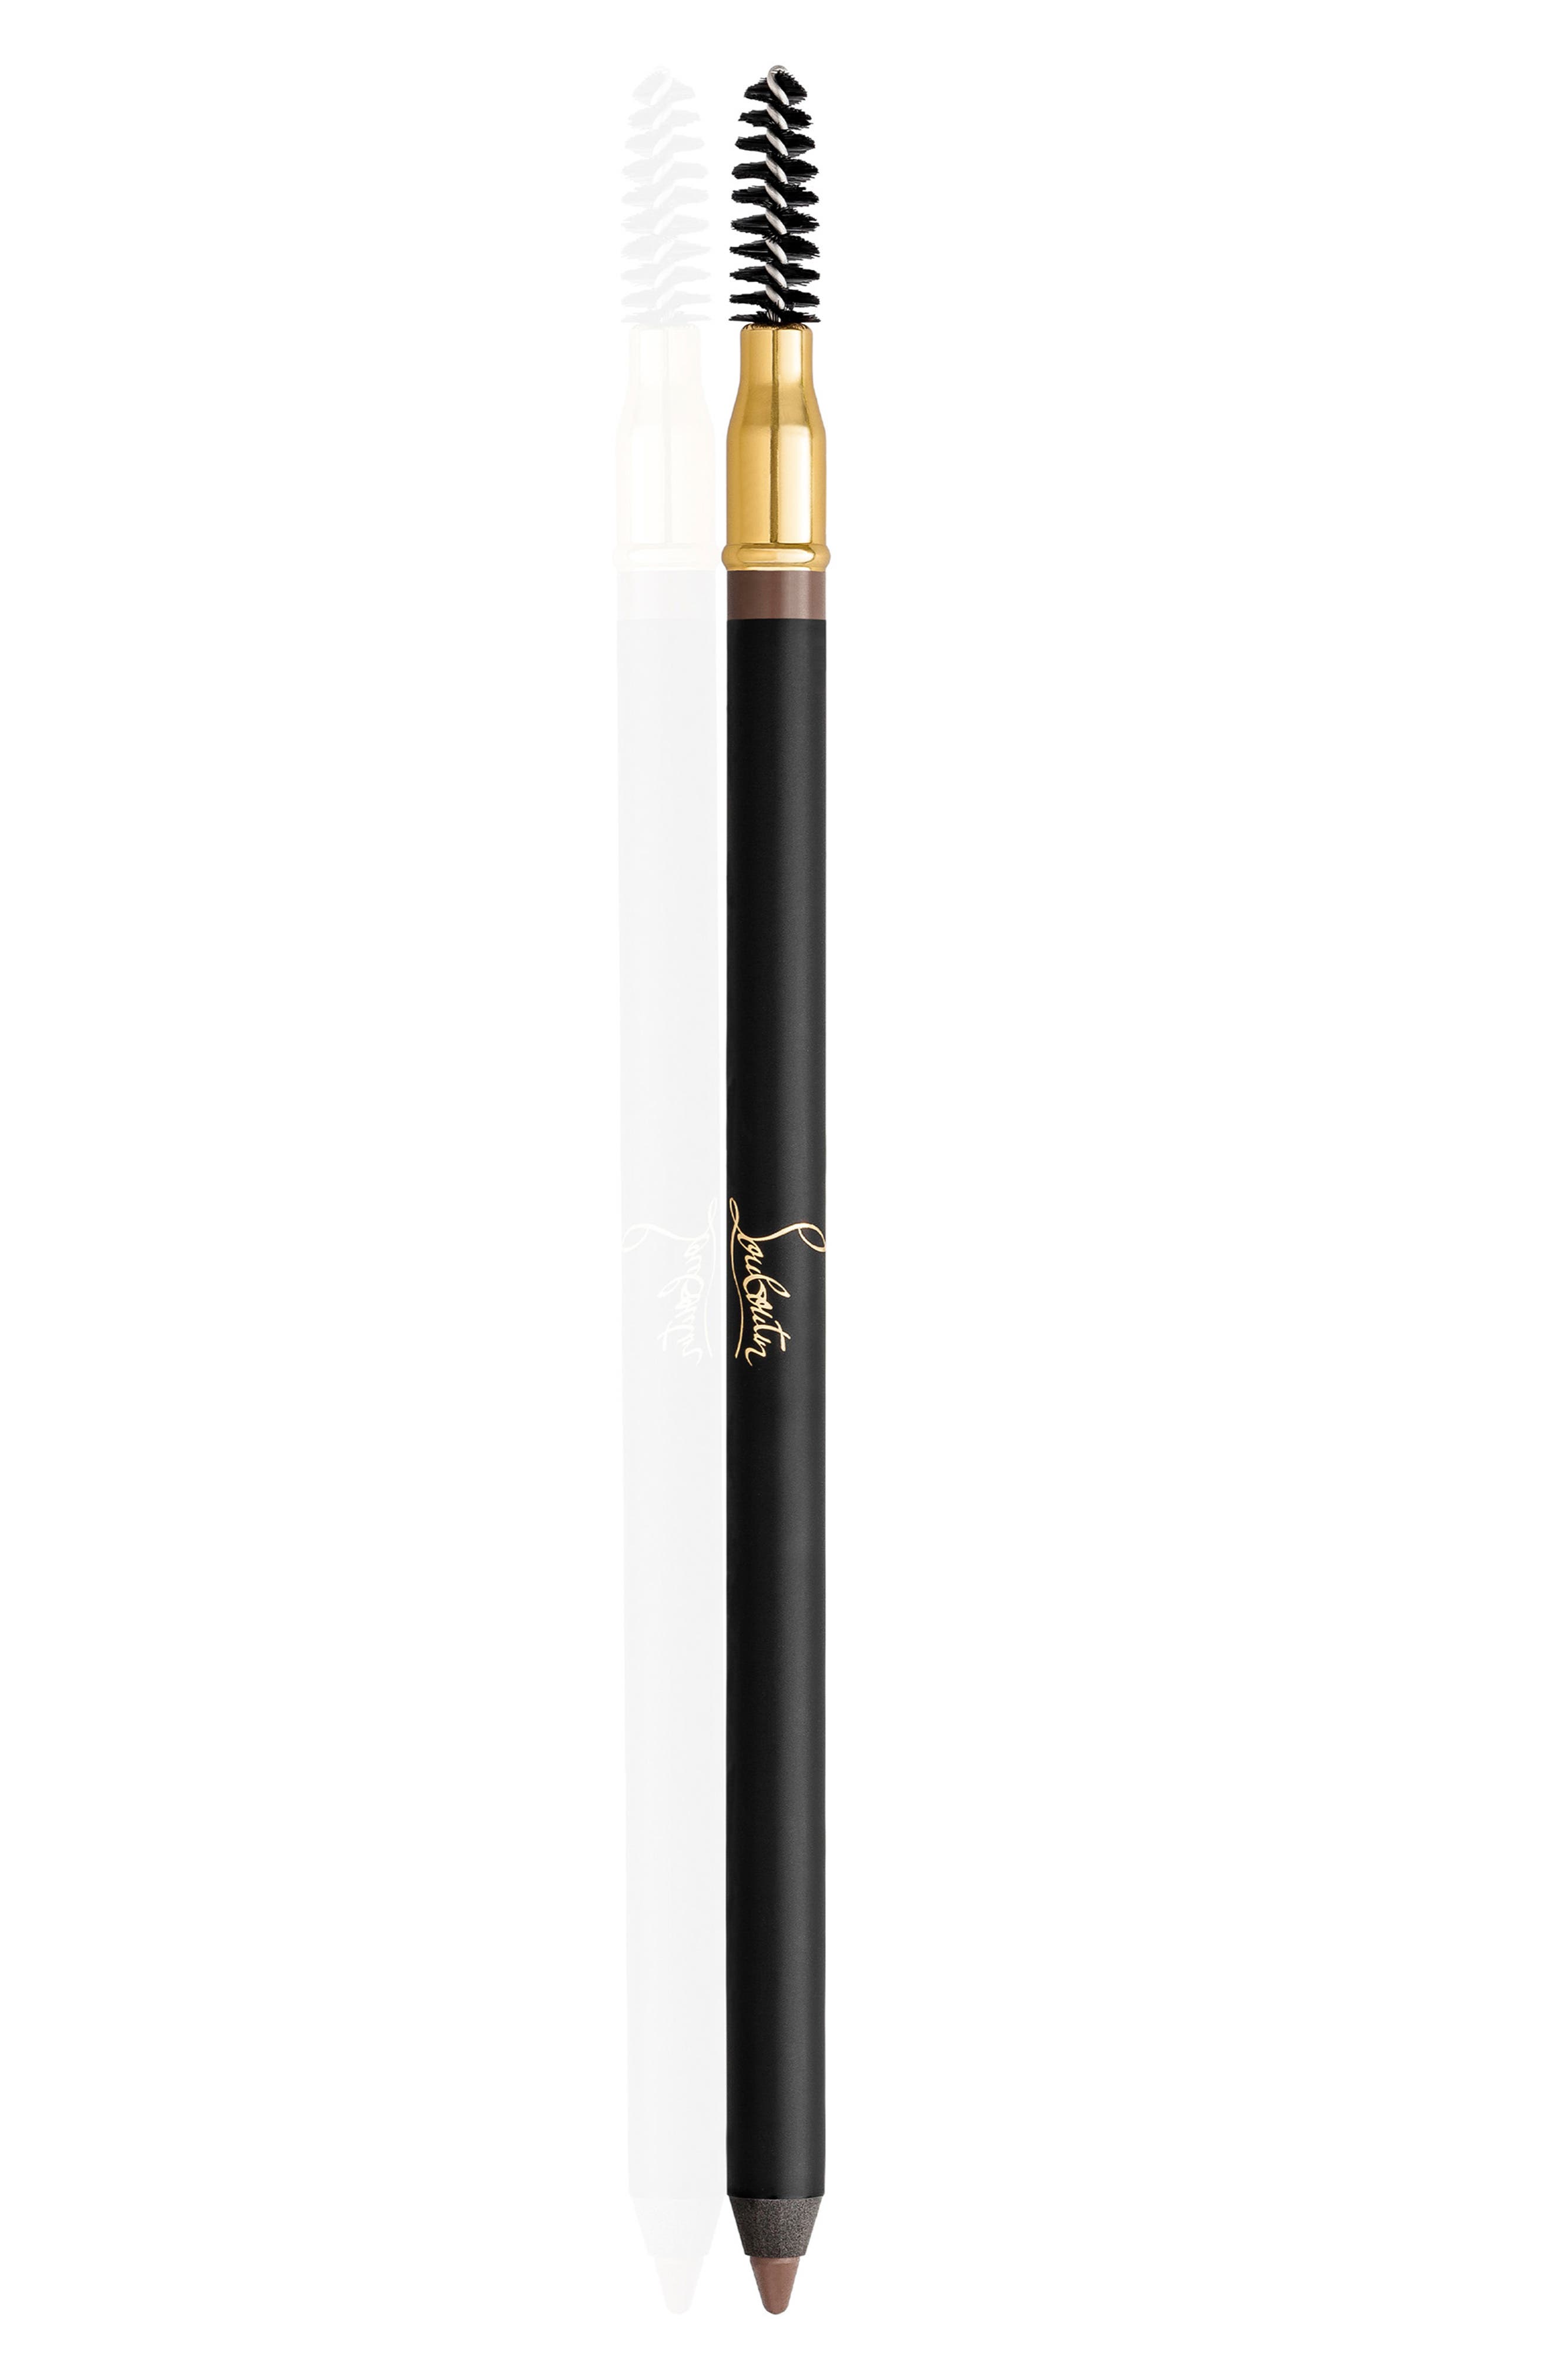 Christian Louboutin Brow Definer in Taupe at Nordstrom